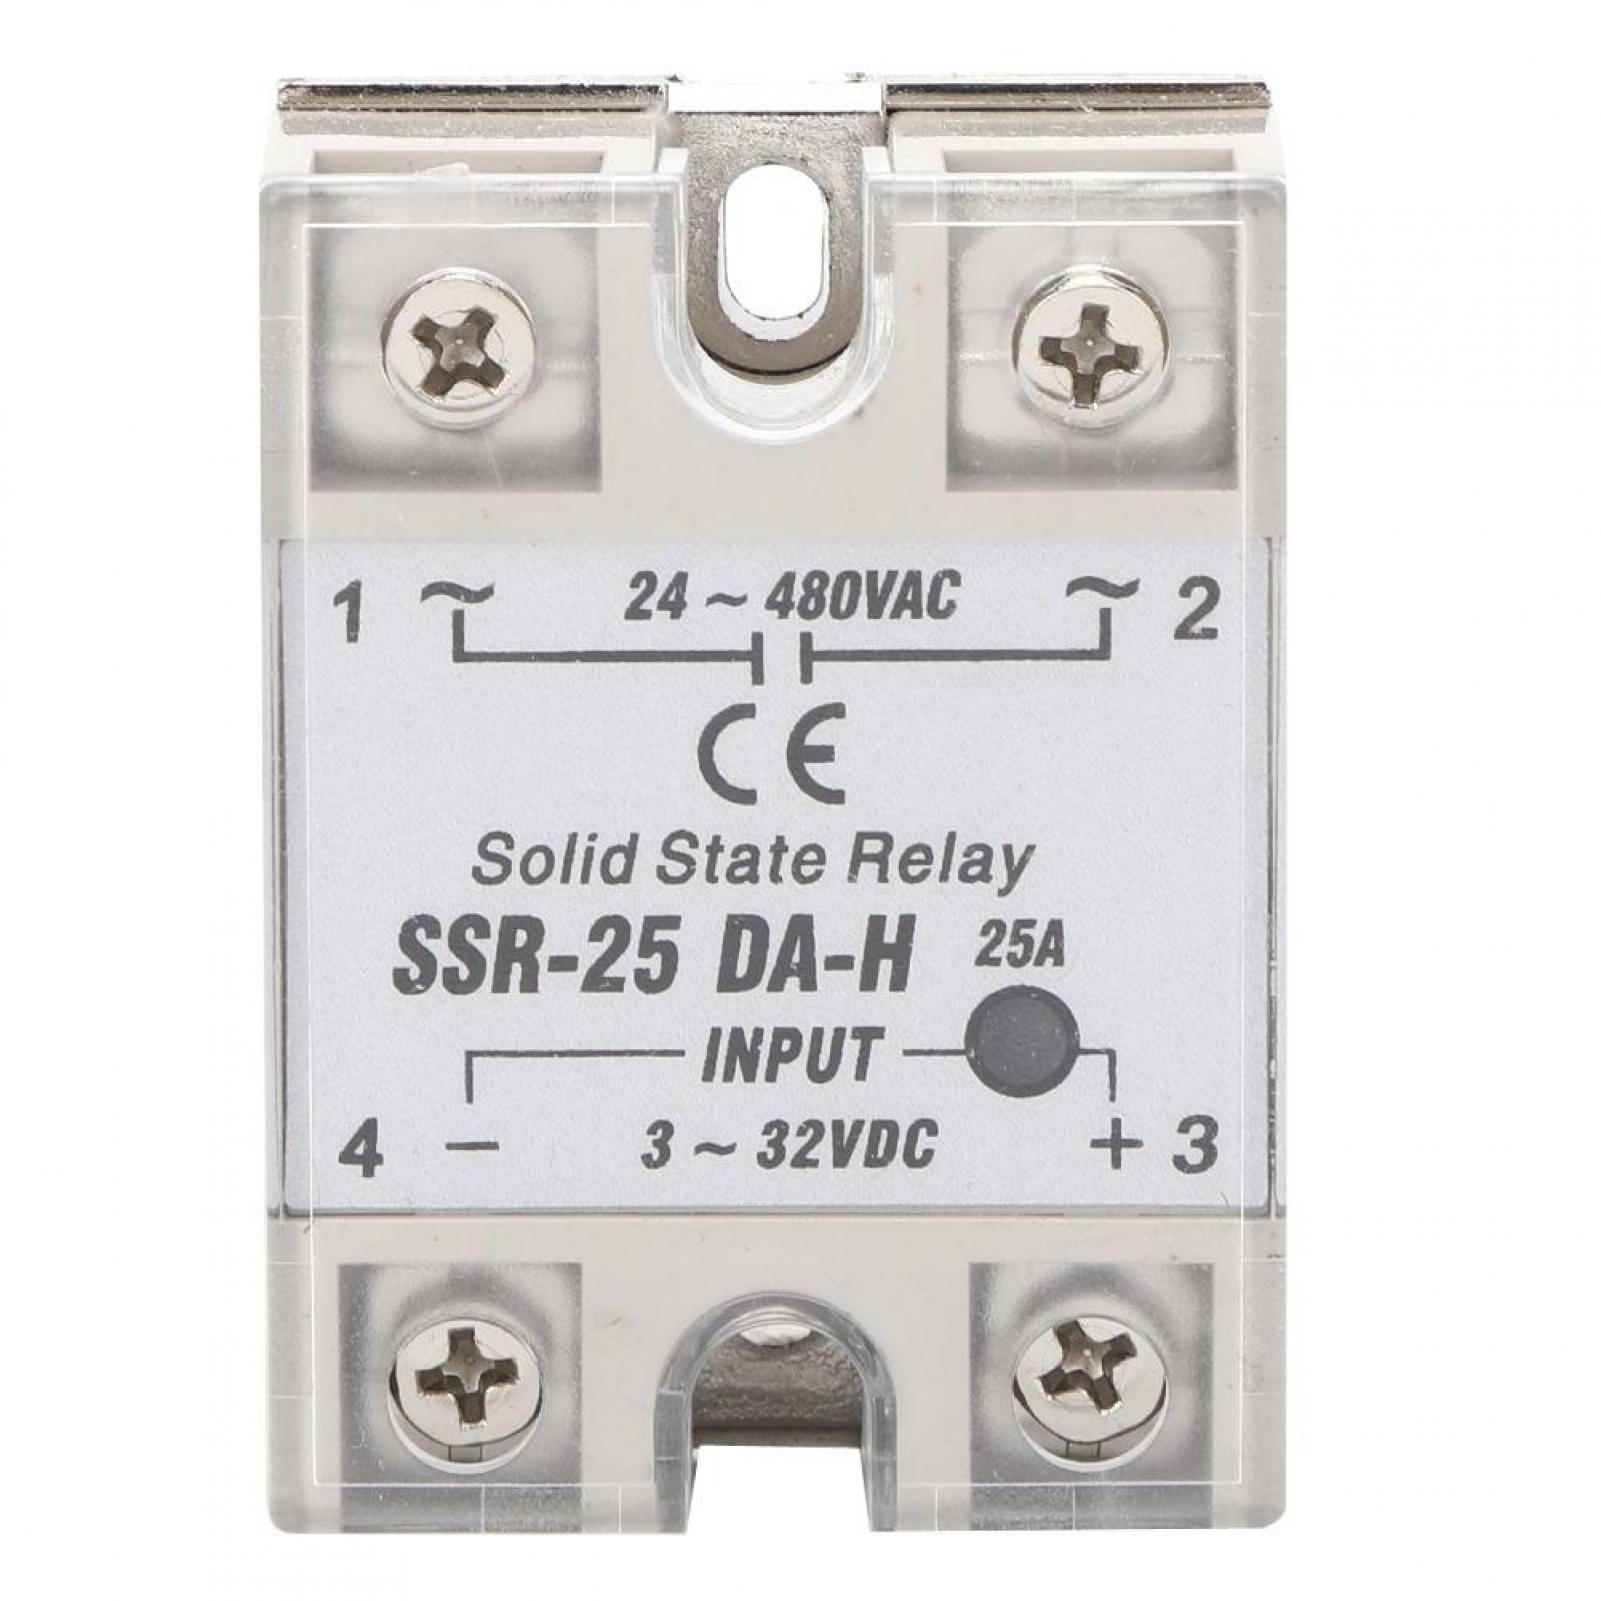 Clear Cover 25A 3-32VDC to 24-480V AC Solid State Relay SSR 